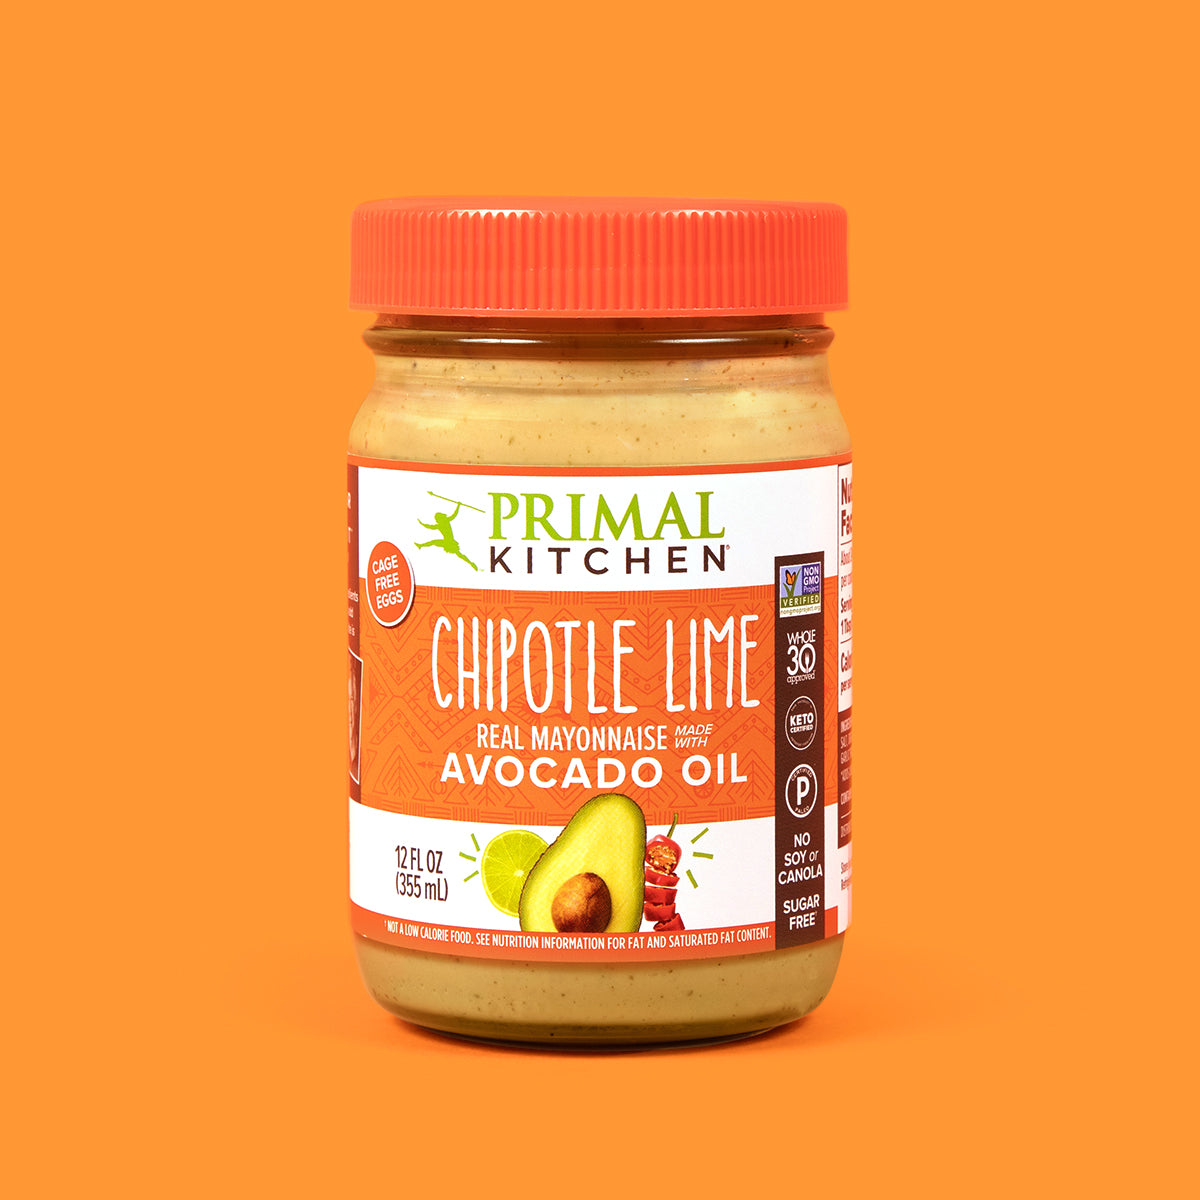 A jar of Primal Kitchen Chipotle Lime Mayo made with Avocado Oil with an orange label and lid on an orange background.